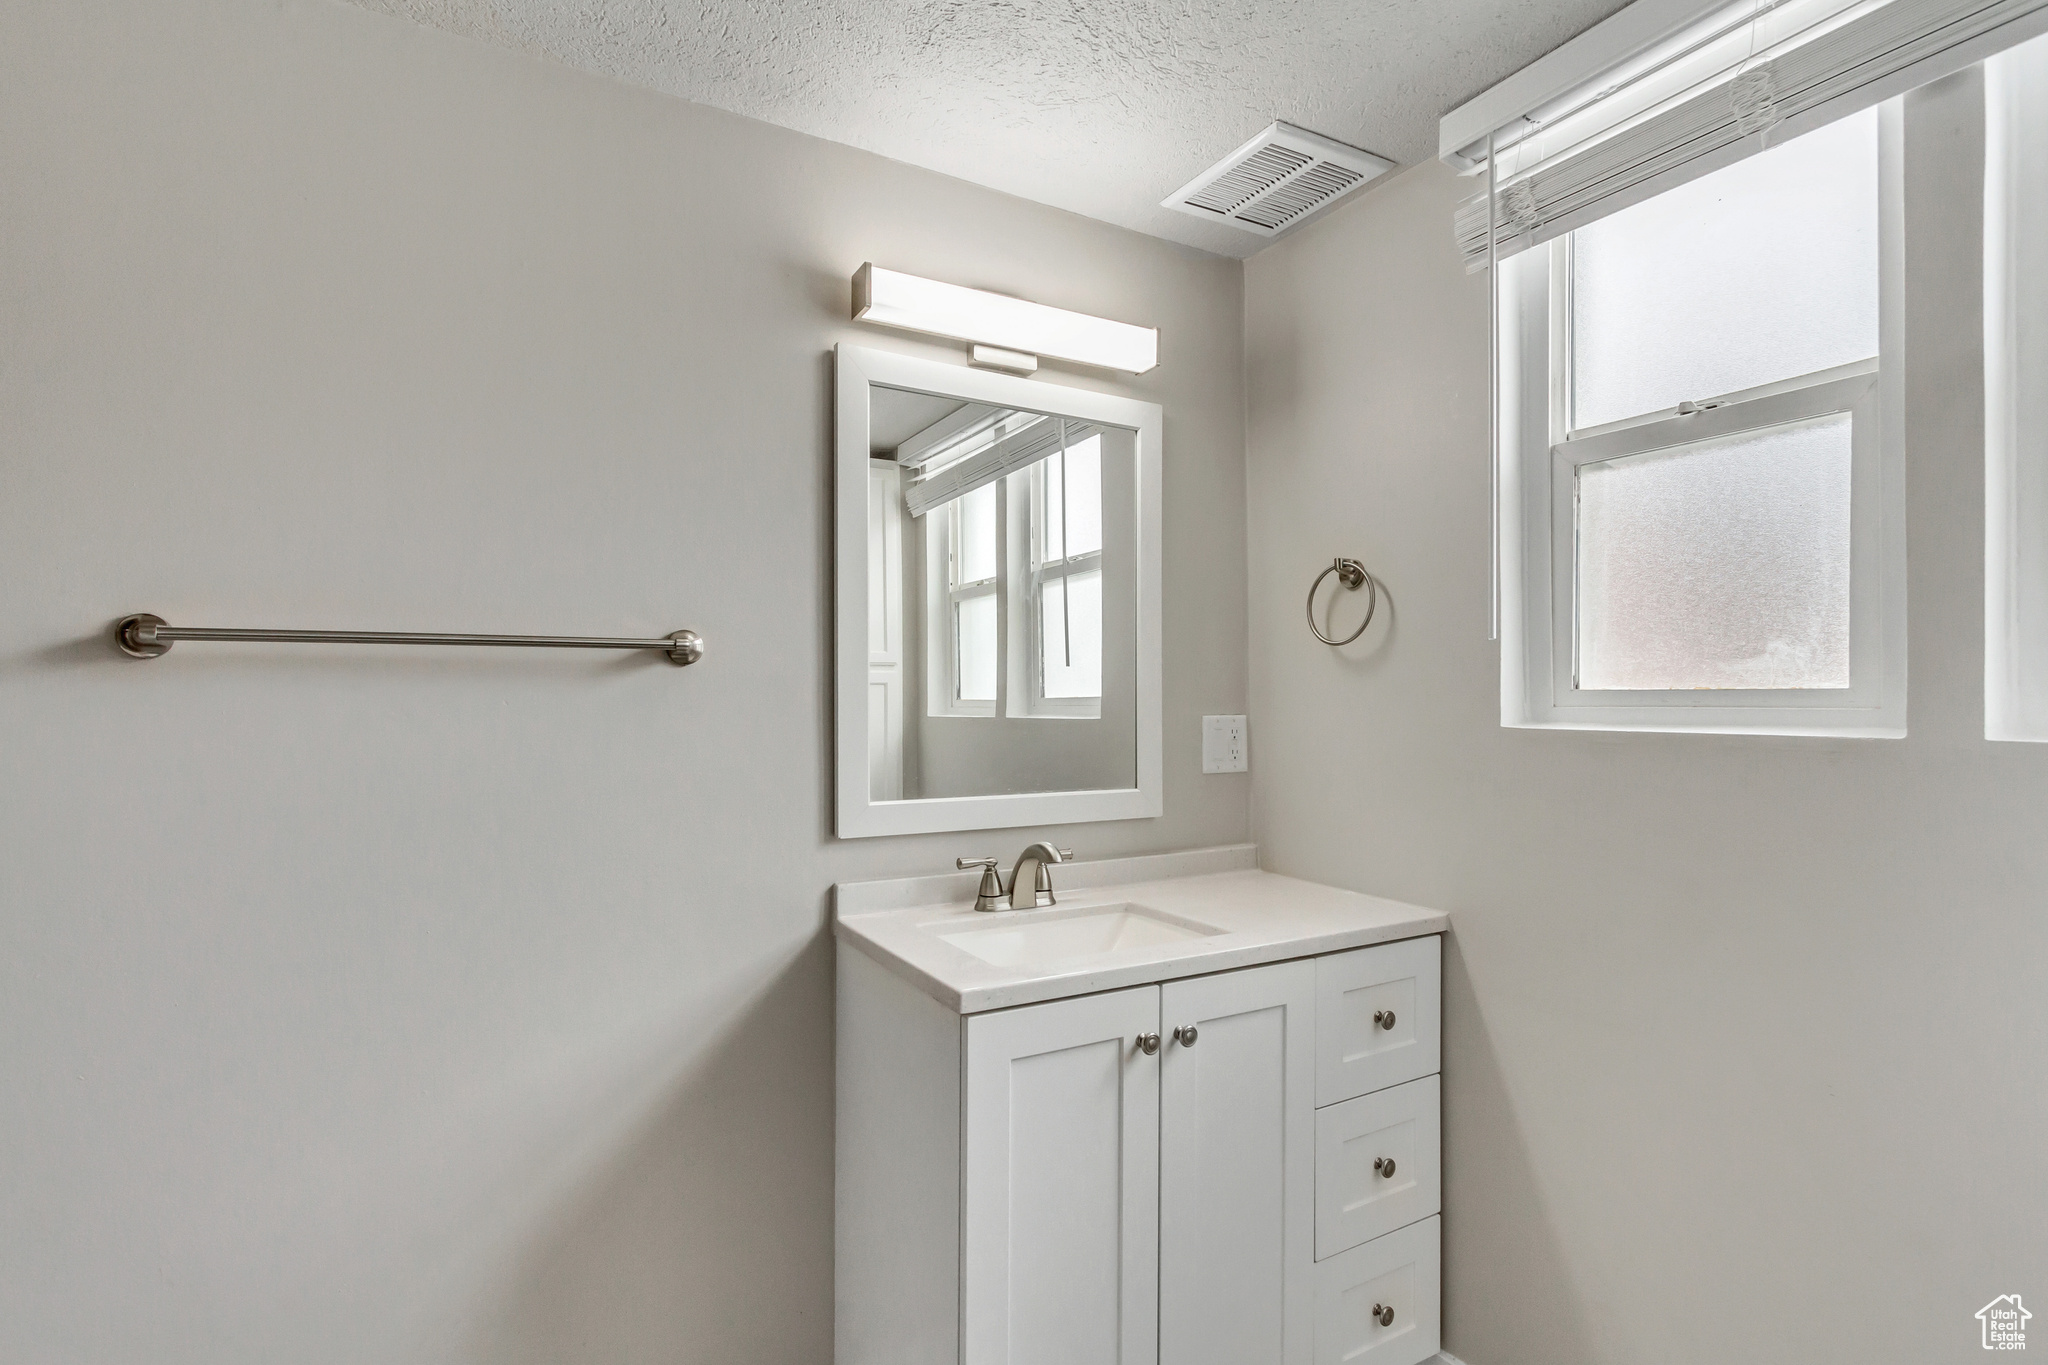 Bathroom featuring vanity and a textured ceiling